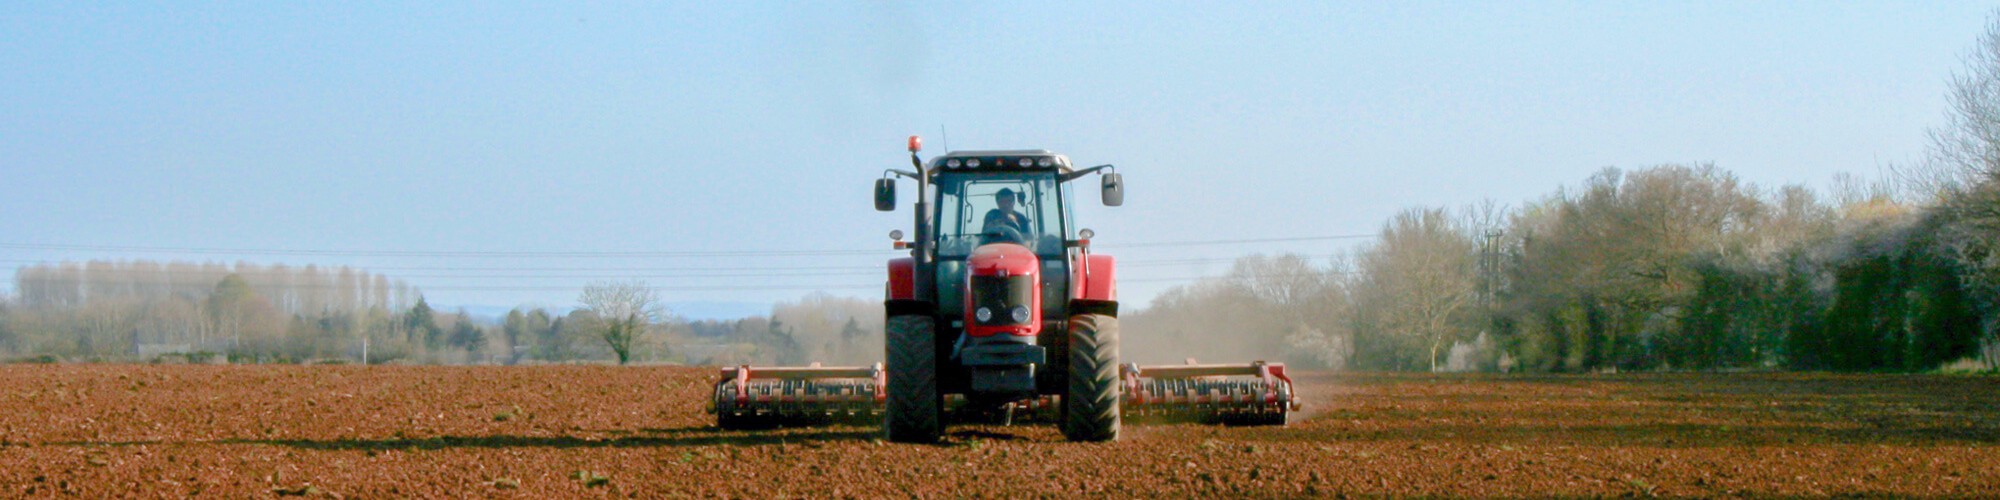 Tractor and farmer working in the field